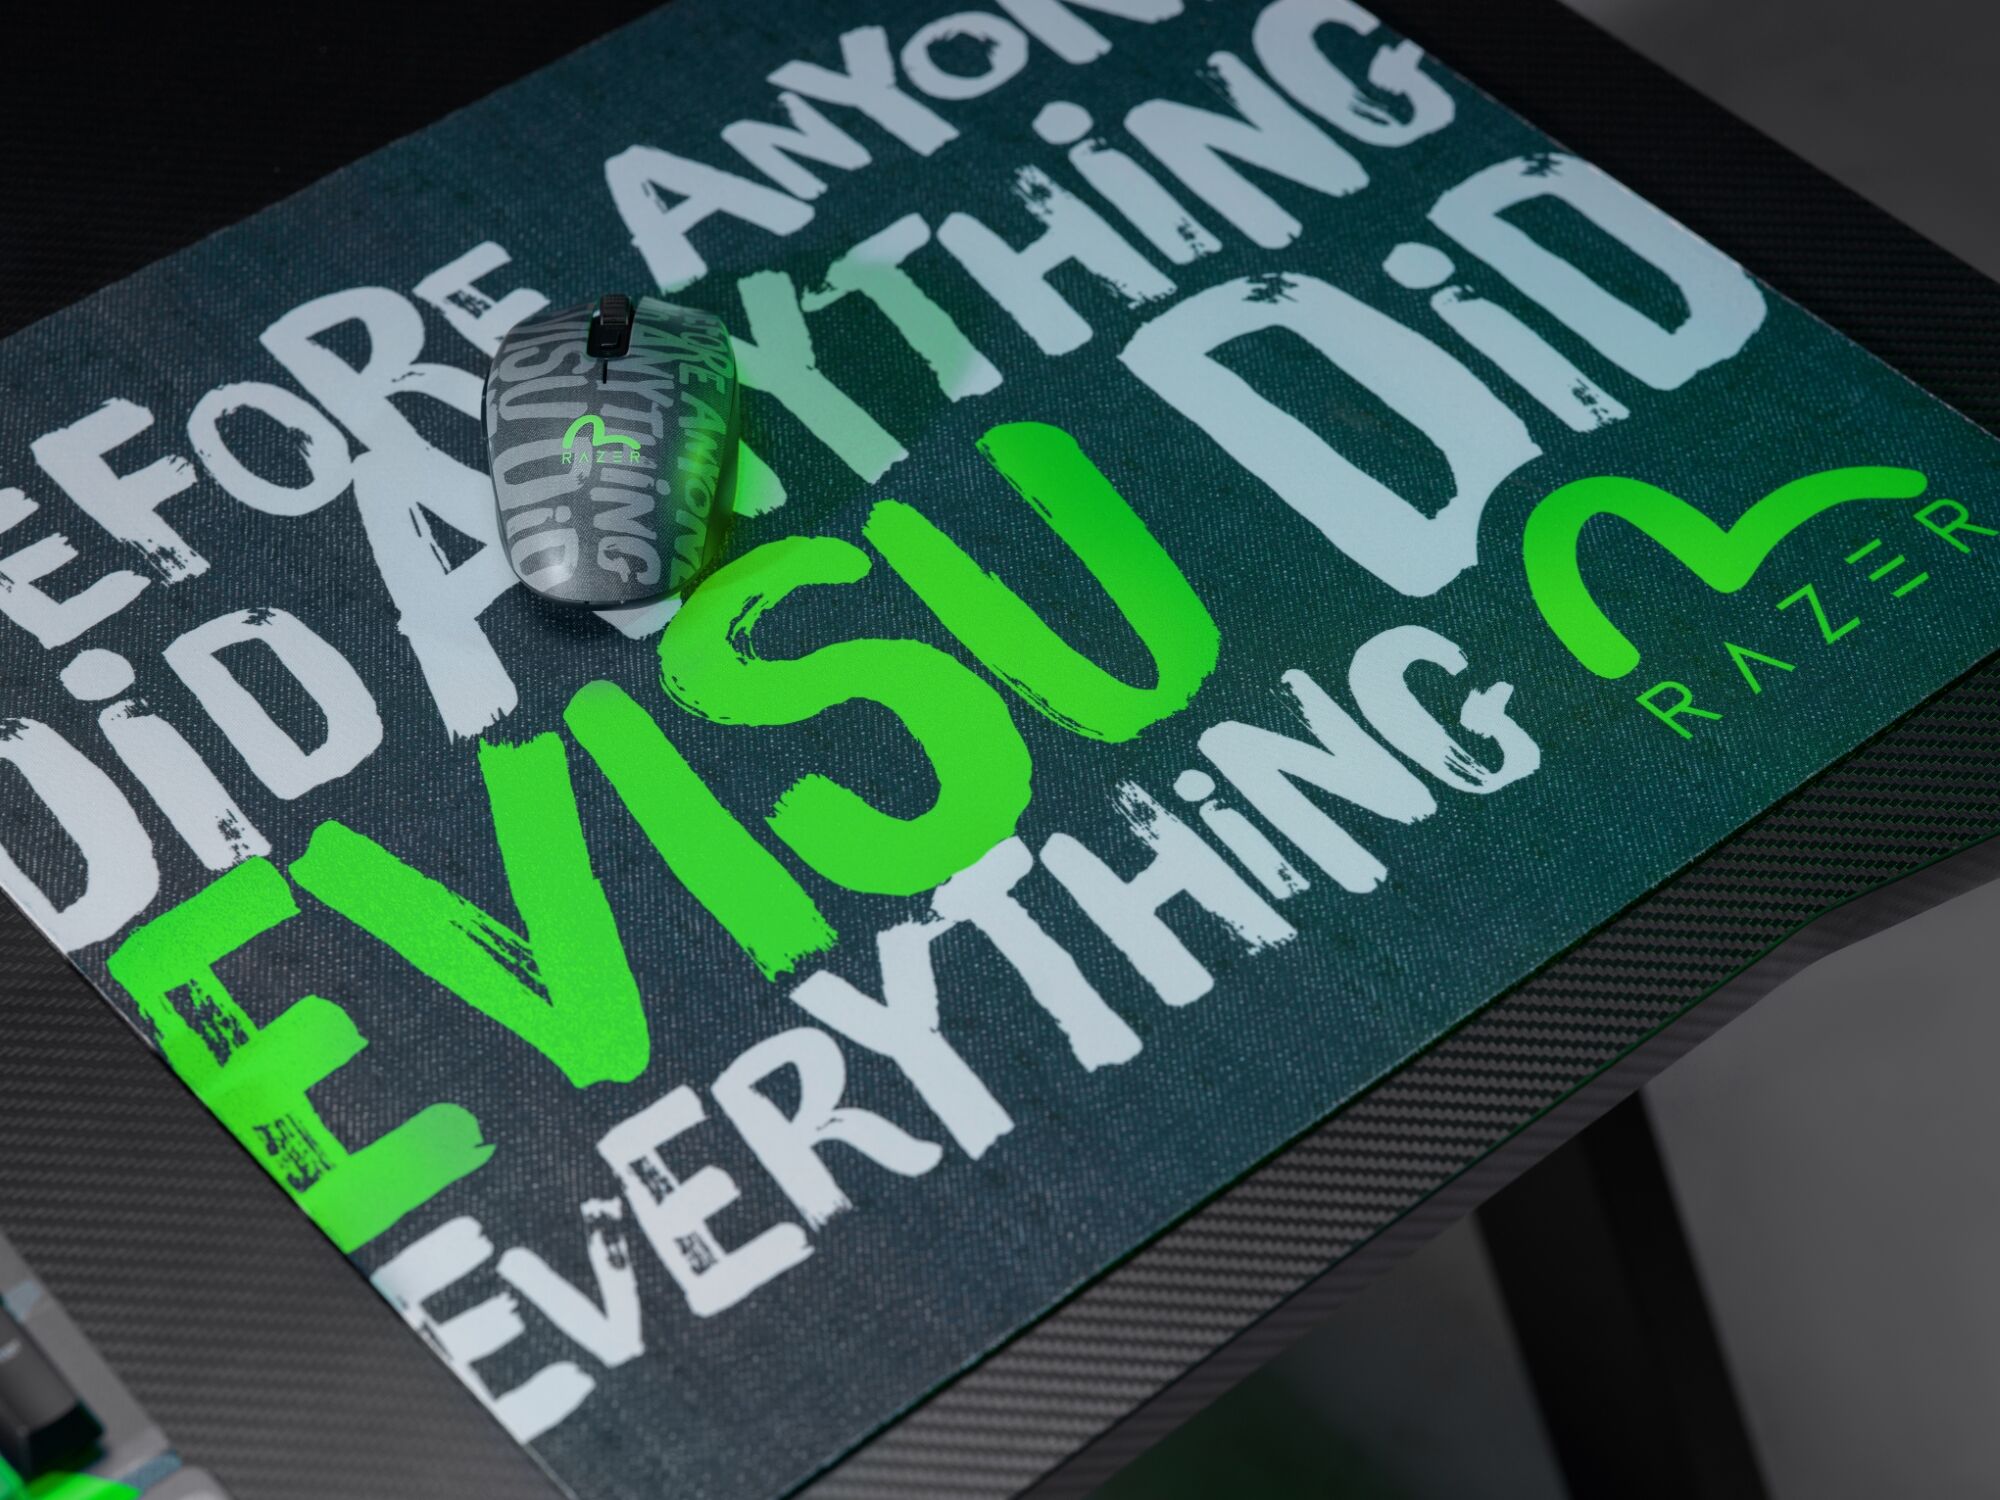 Razer And EVISU Teamed Up With Specially Designed Peripherals And Apparel 26